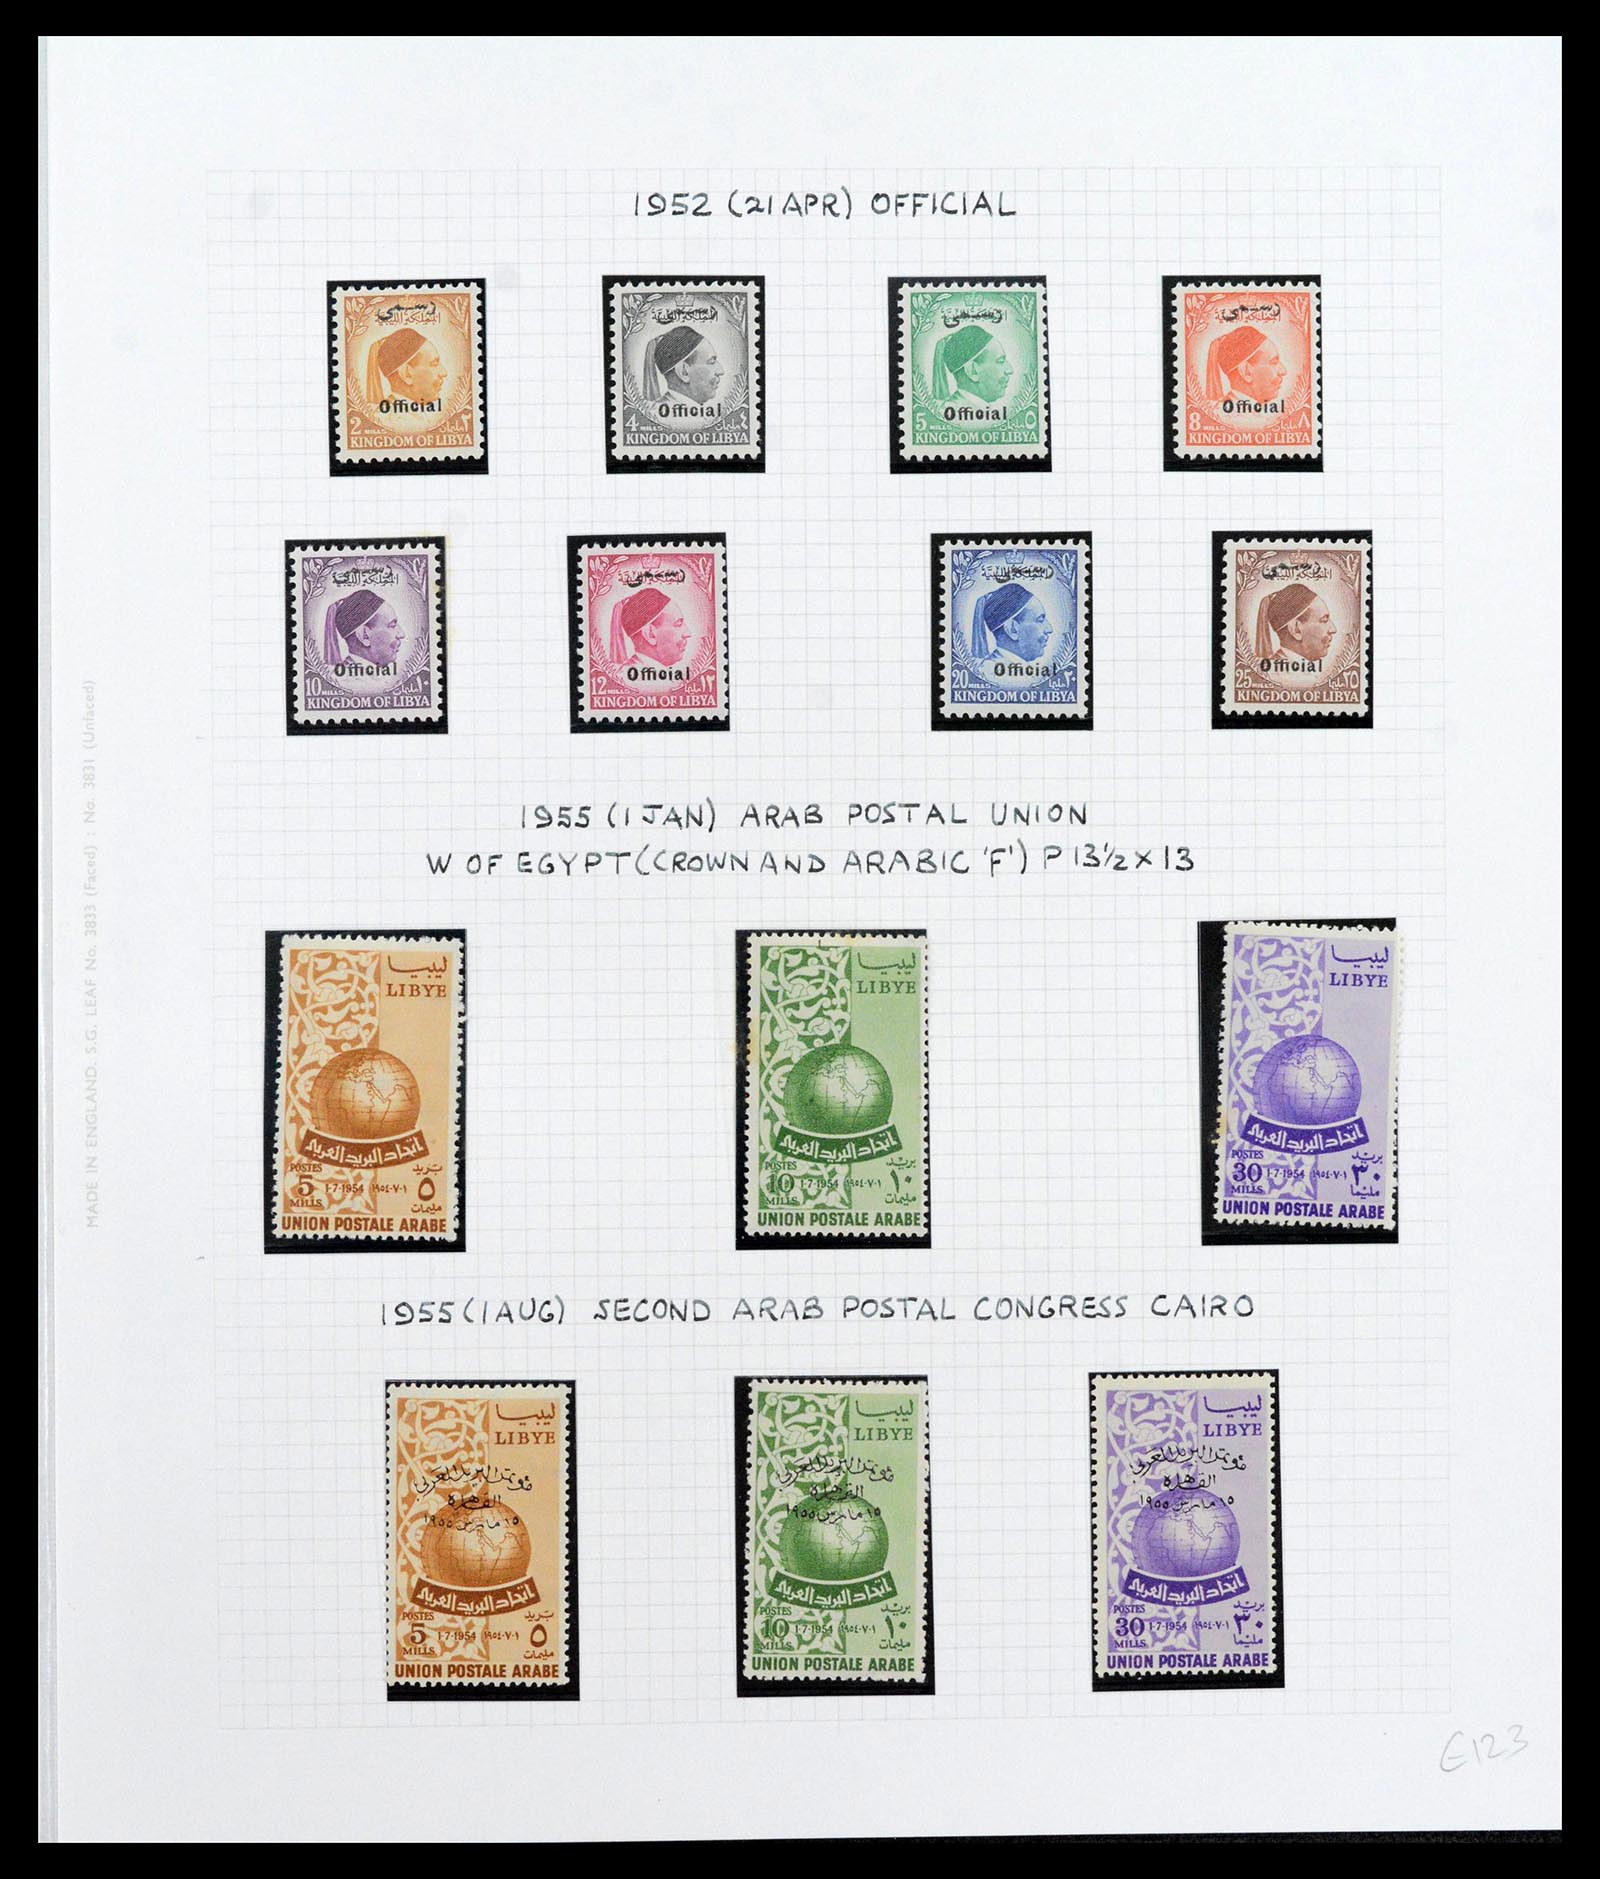 39068 0044 - Stamp collection 39068 Libya complete 1912-1969.